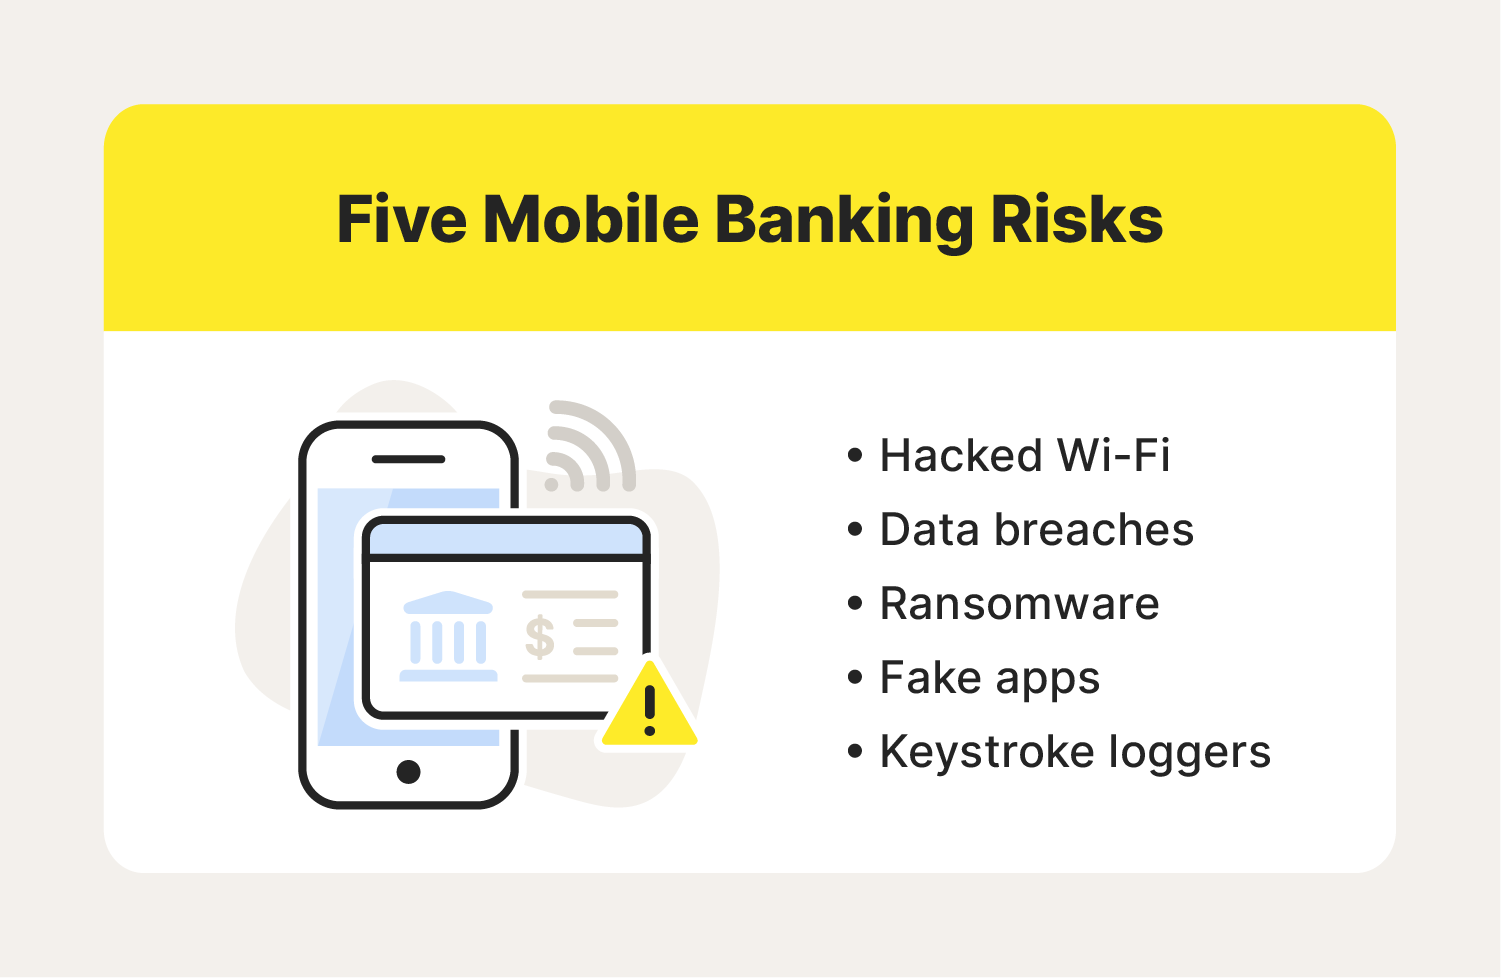 An infographic details five mobile banking risks to educate users who’d like to know “is mobile banking safe?”